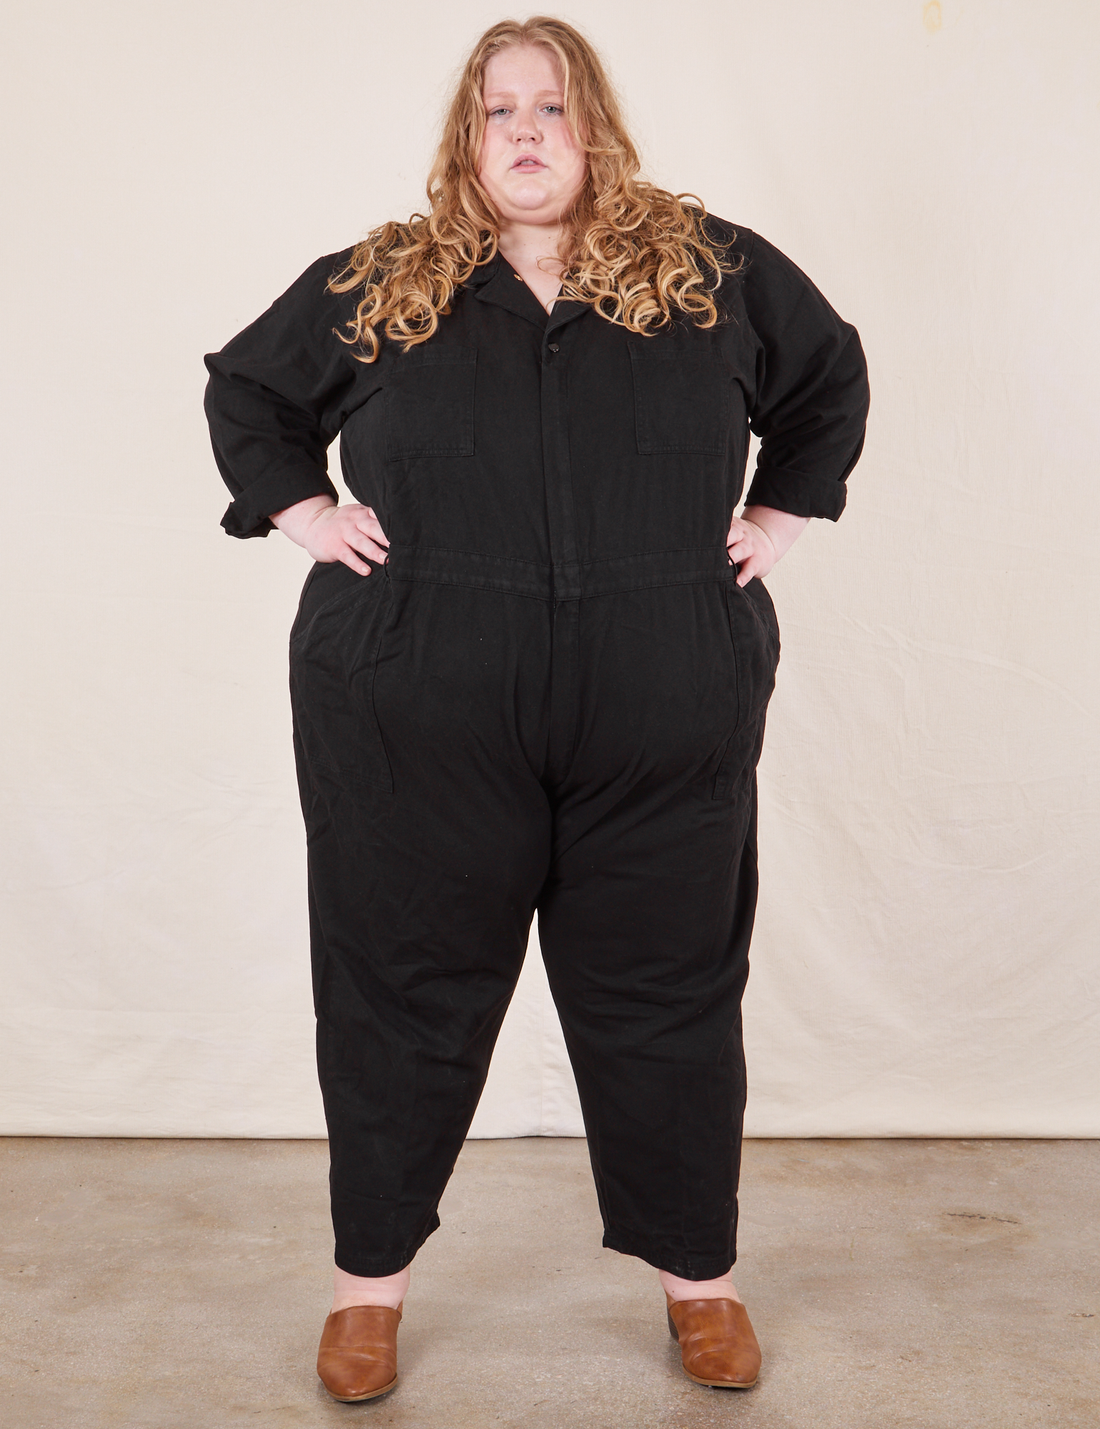 Catie is 5'11" and wearing 5XL Everyday Jumpsuit in Basic Black